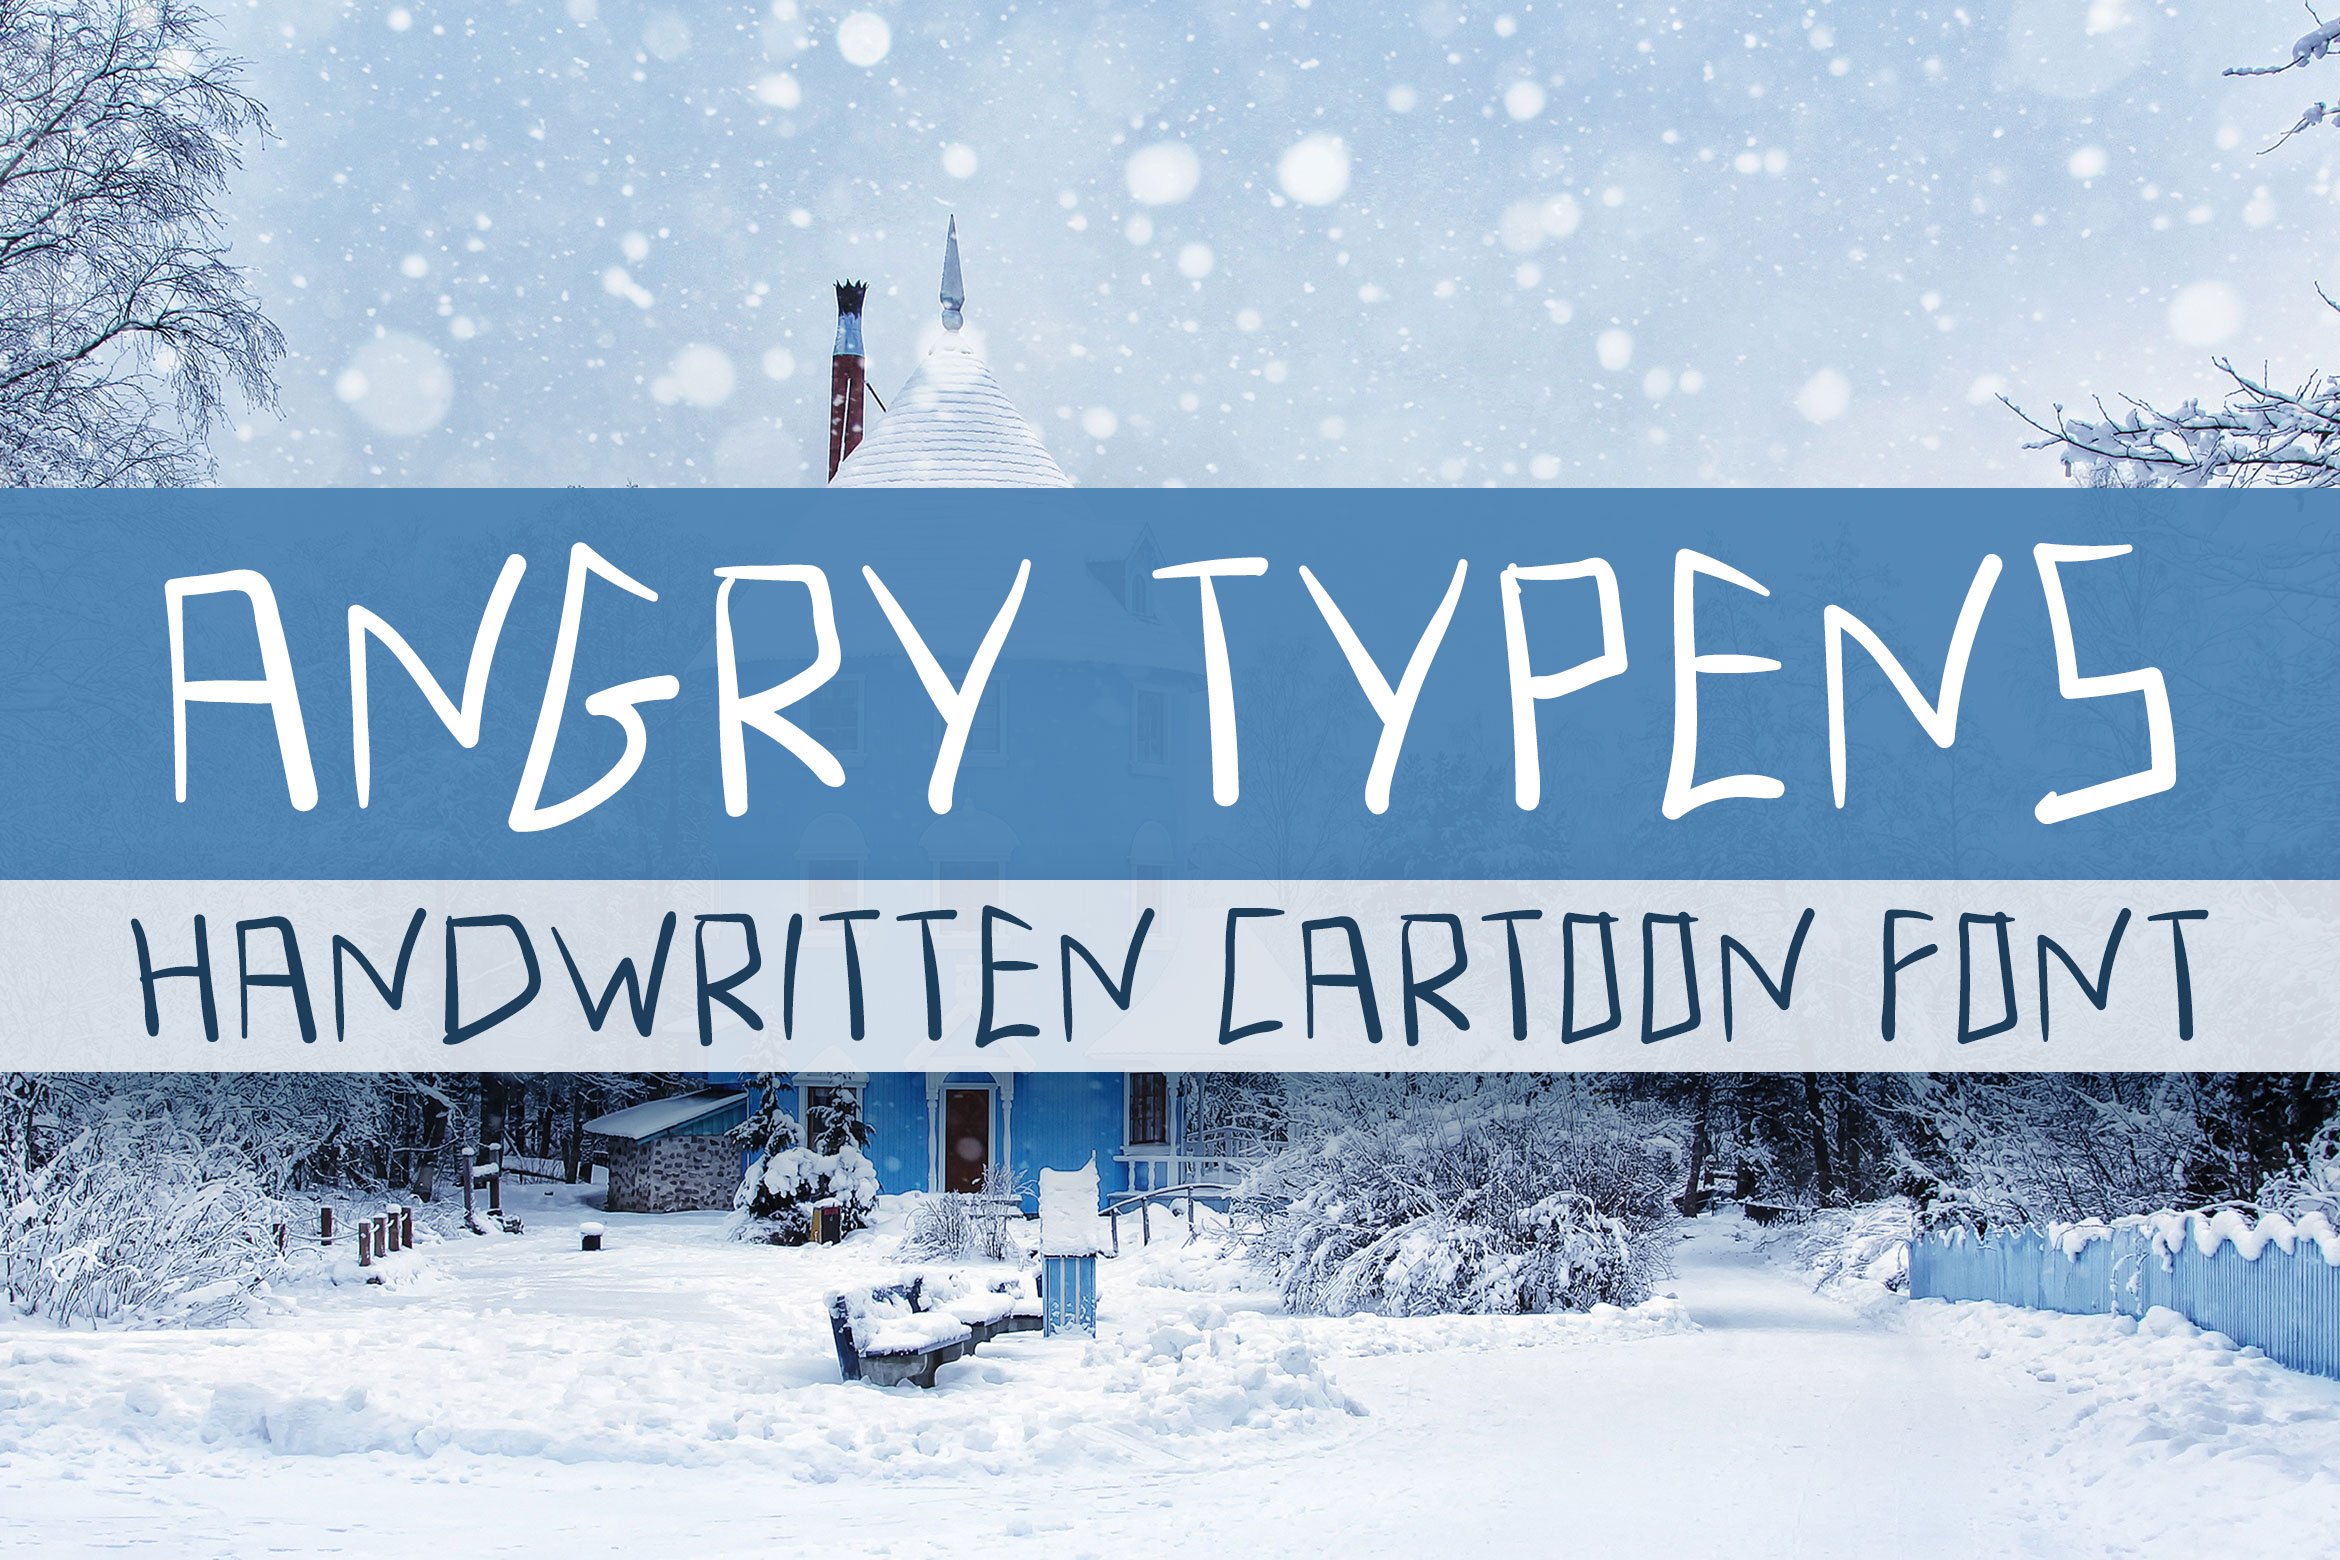 Angry Typens - Handwritten Font cover image.